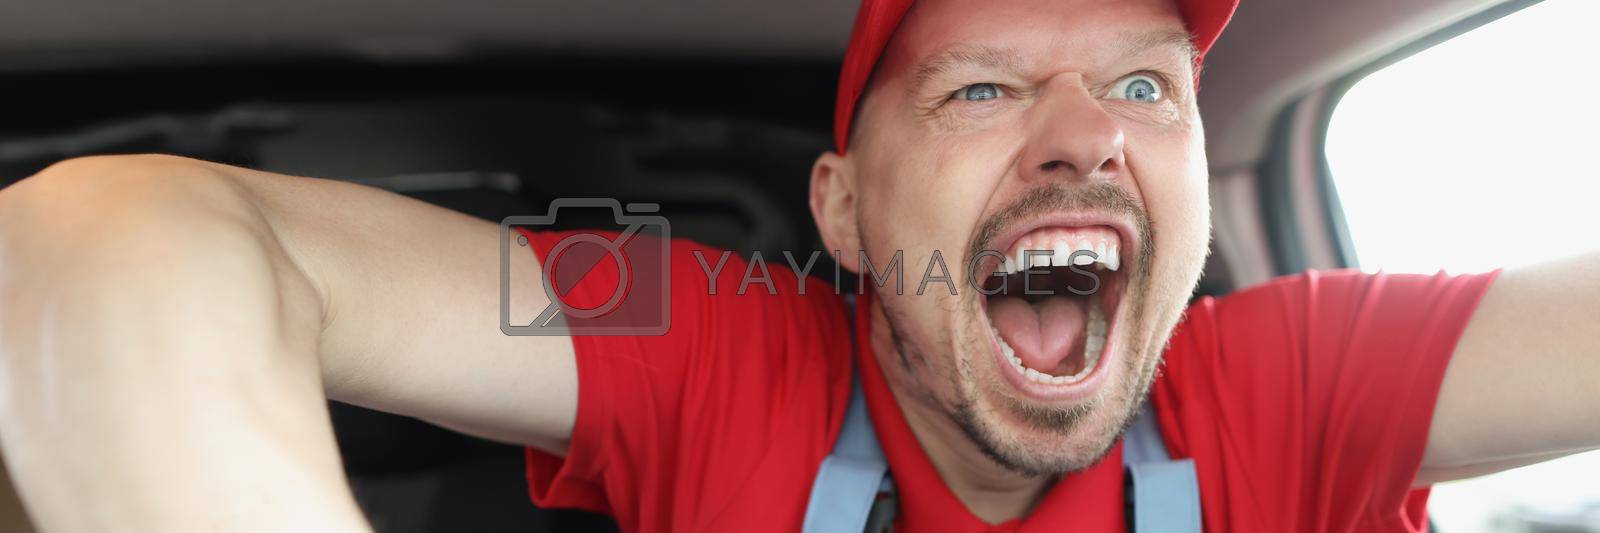 Royalty free image of Guy with crazy facial expression by kuprevich